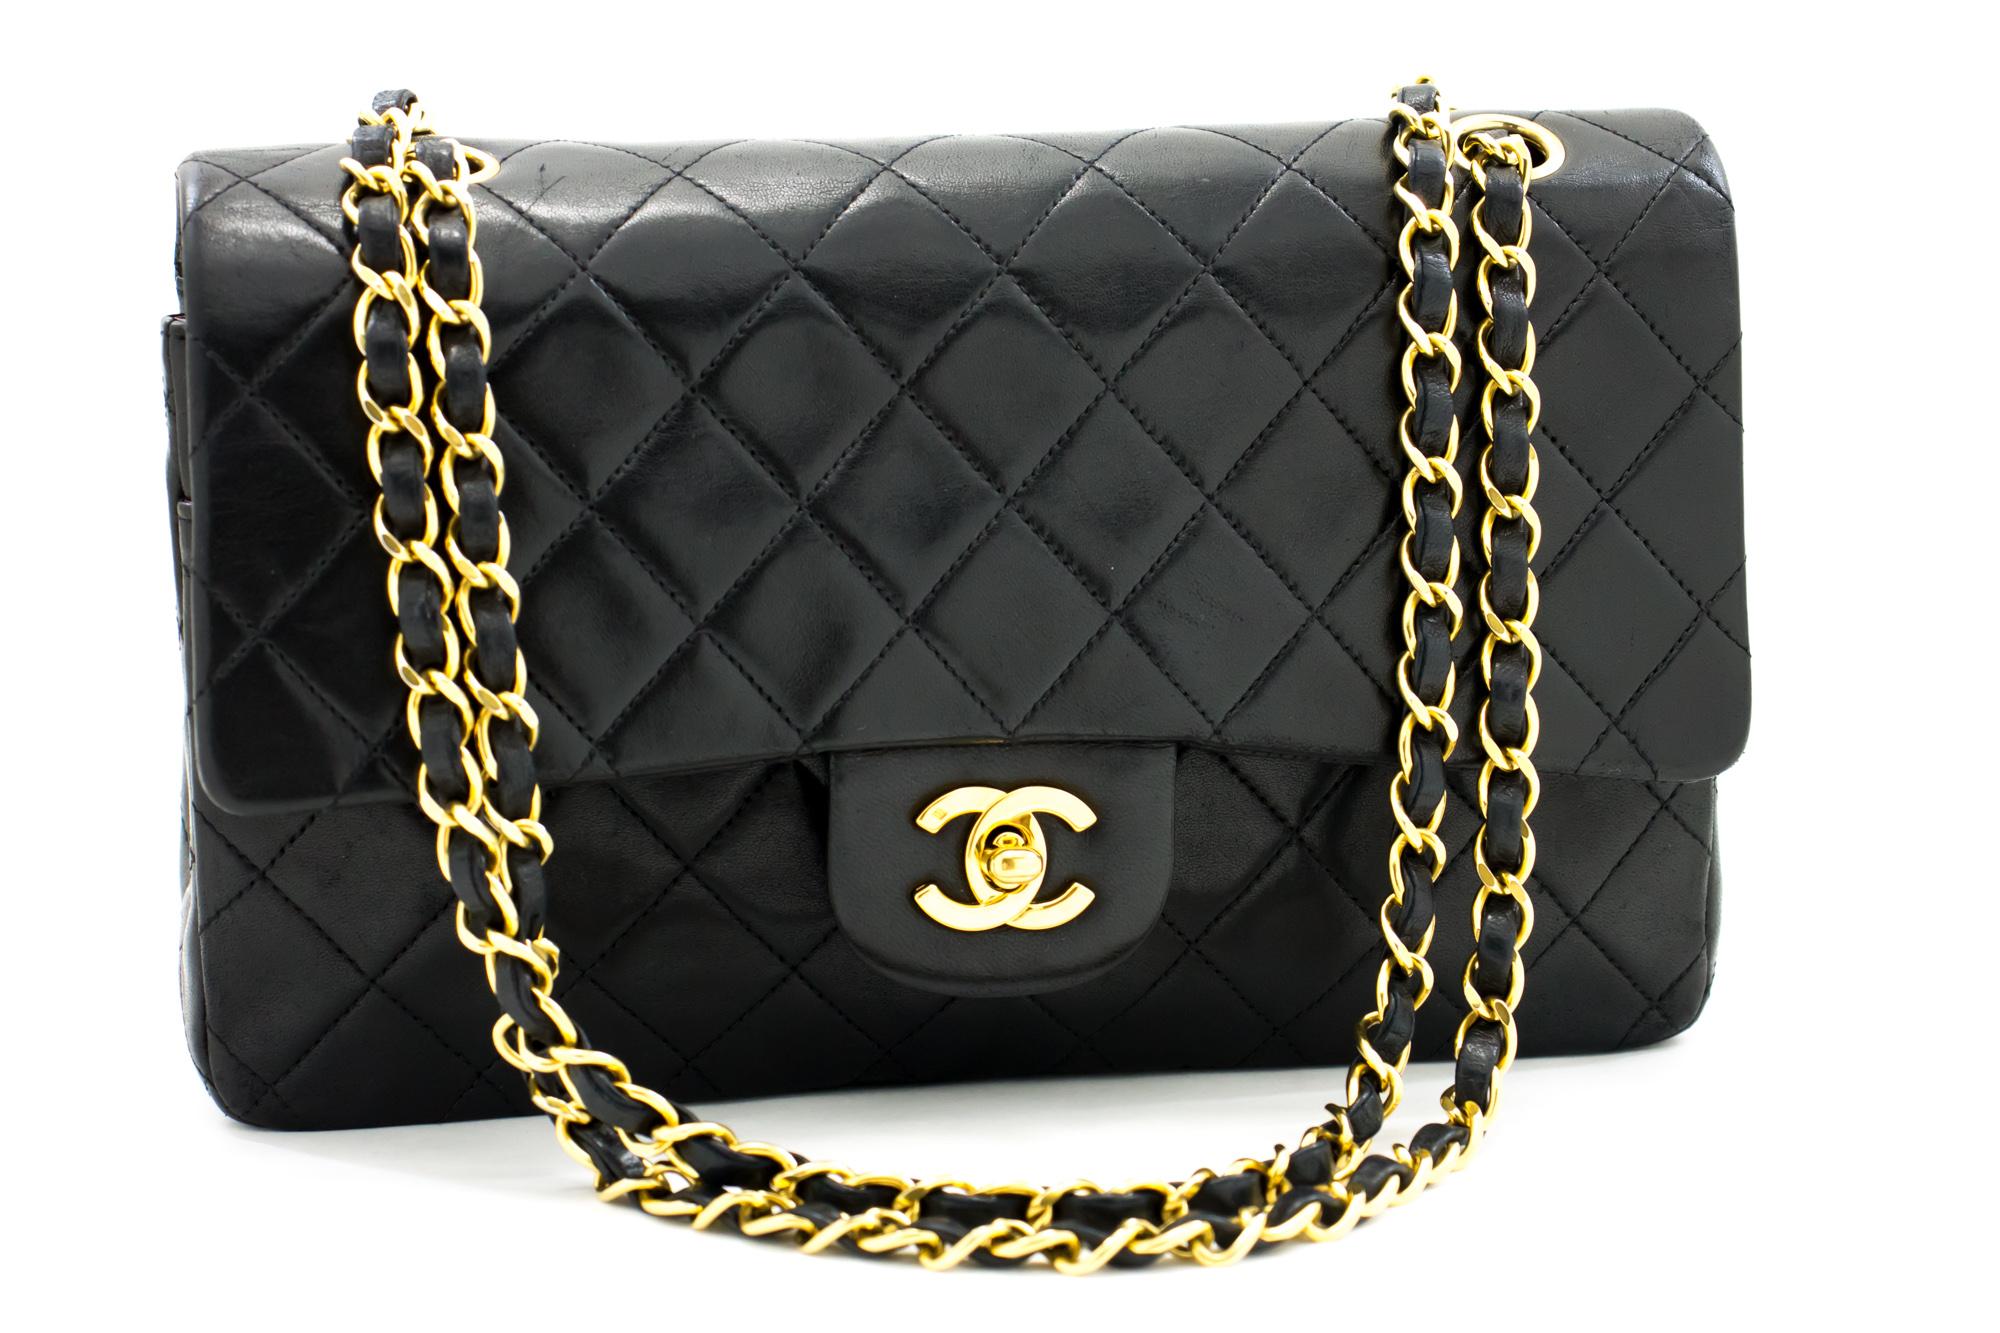 An authentic CHANEL 2.55 Classic Double Flap Medium Chain Shoulder Bag Black made of black Lambskin. The color is Black. The outside material is Leather. The pattern is Solid. This item is Vintage / Classic. The year of manufacture would be